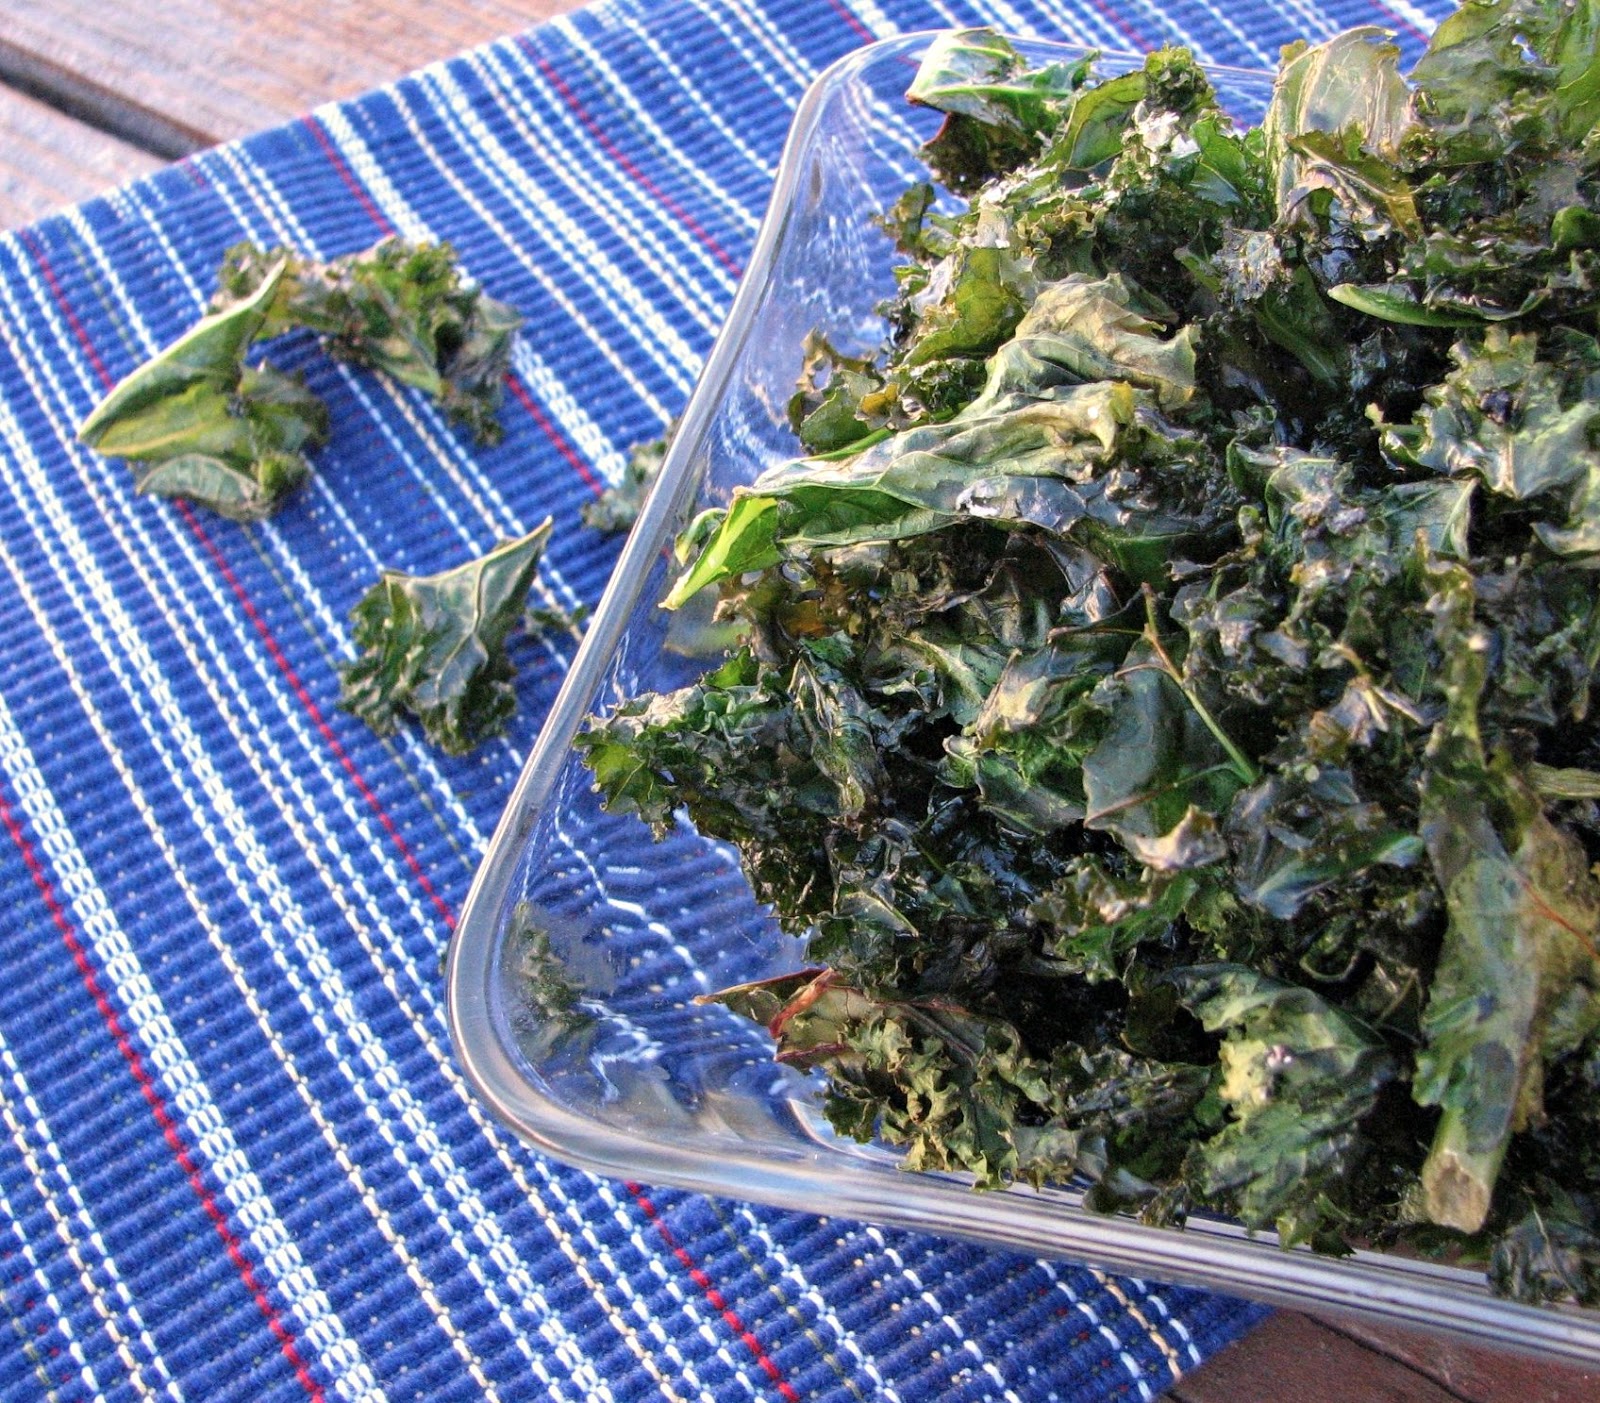 Can You Buy Kale Chips At Whole Foods